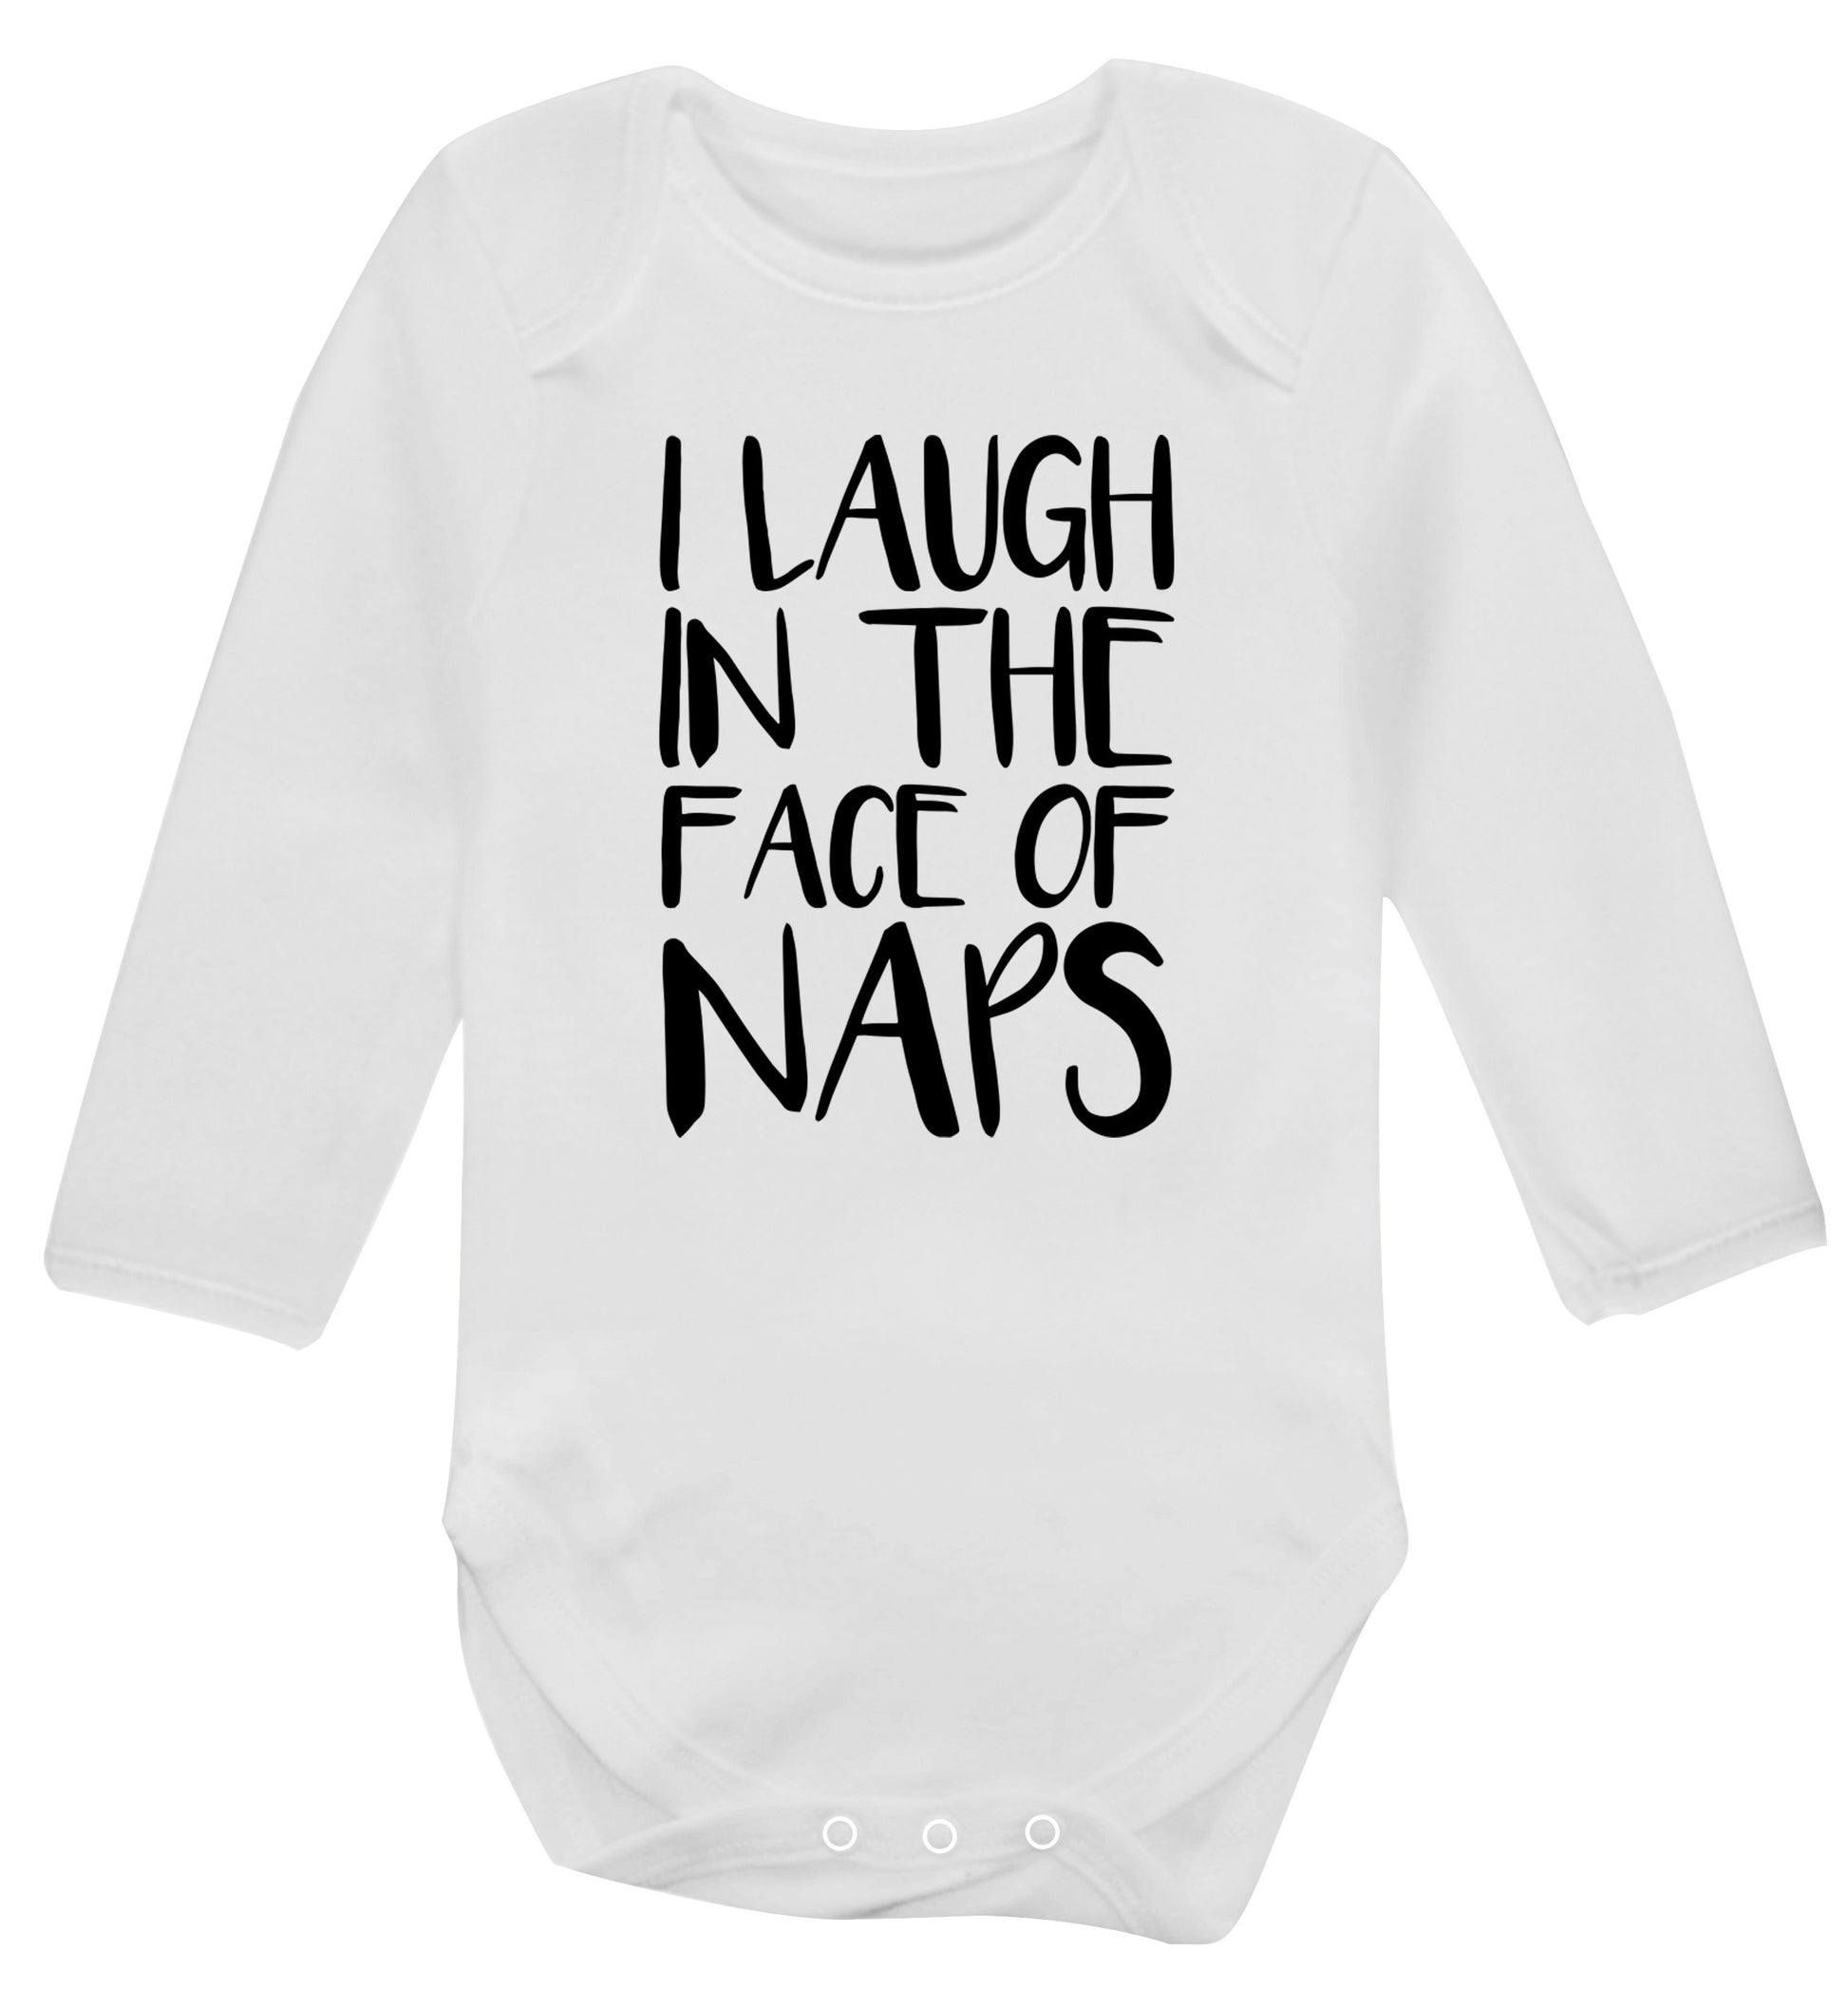 I laugh in the face of naps Baby Vest long sleeved white 6-12 months